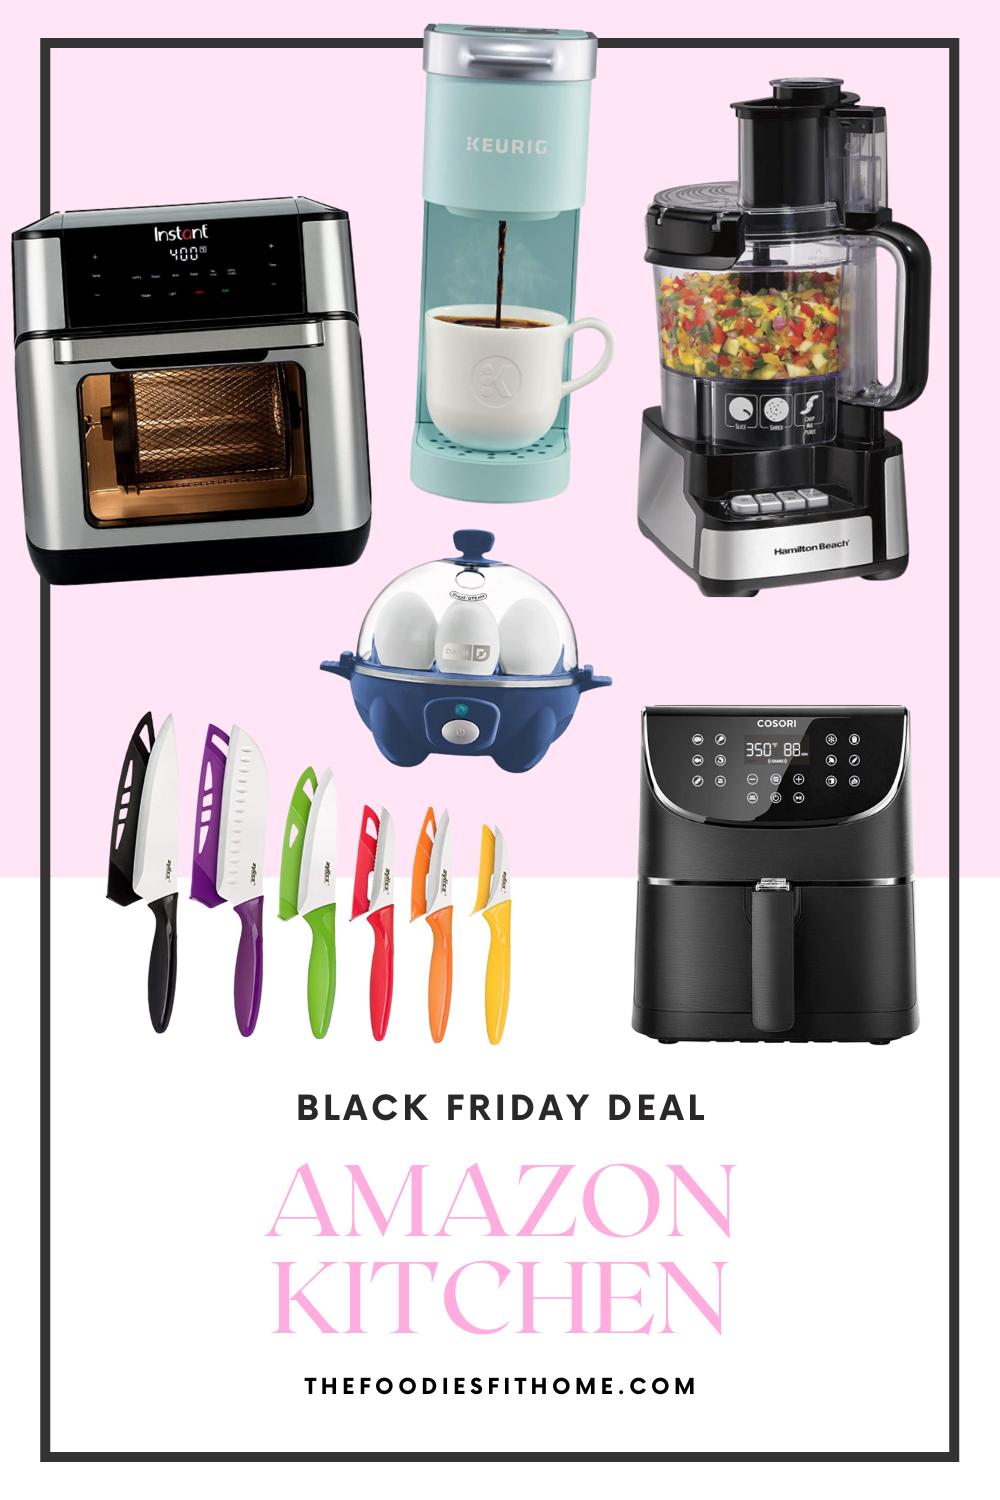 https://thefoodiesfithome.com/wp-content/uploads/2021/11/Amazon-Kitchen-Black-Friday.png